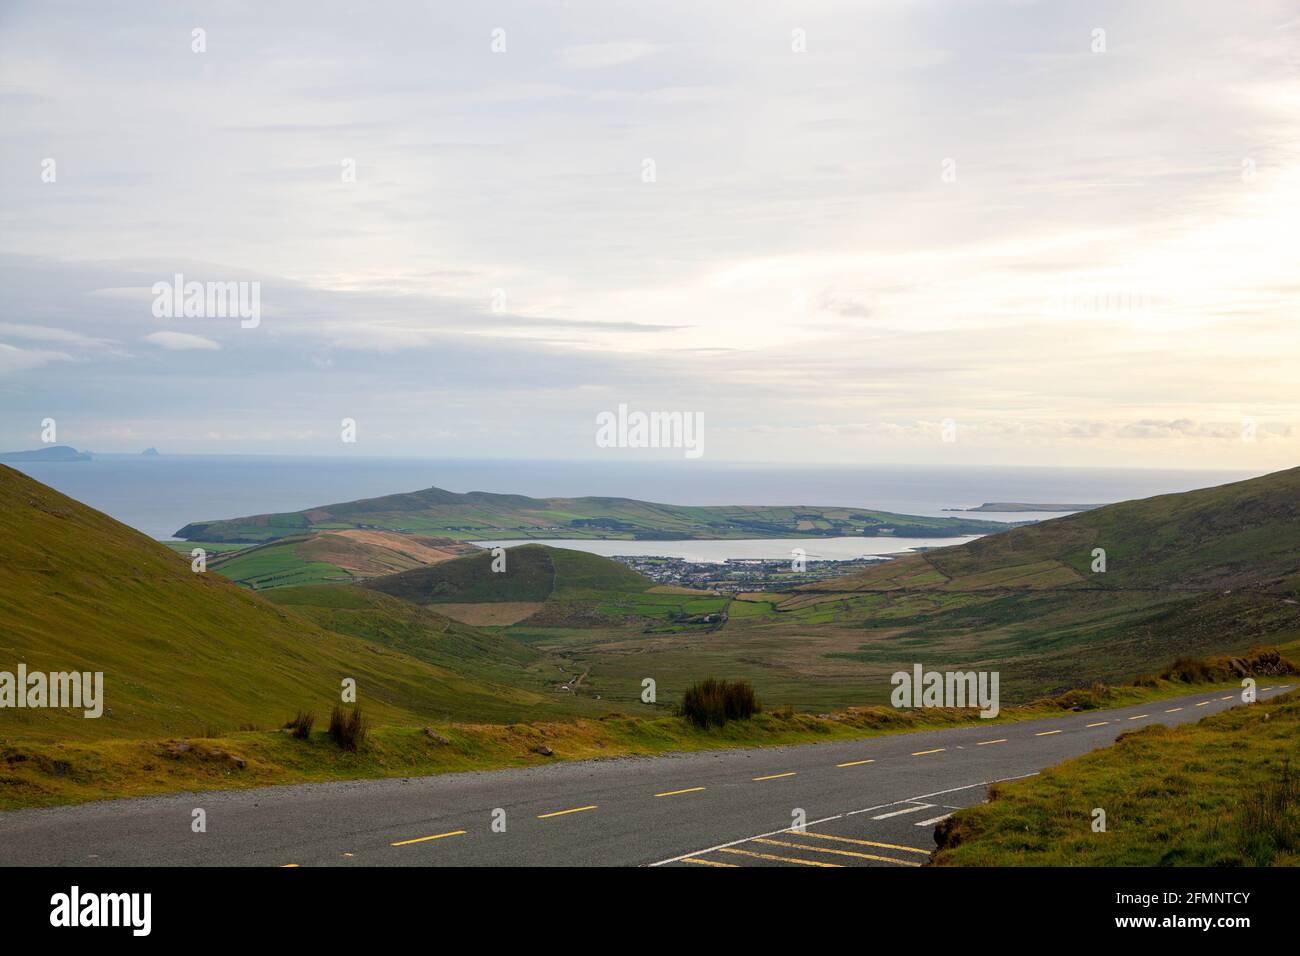 A view from Conor pass in Dingle peninsula in Ireland Stock Photo